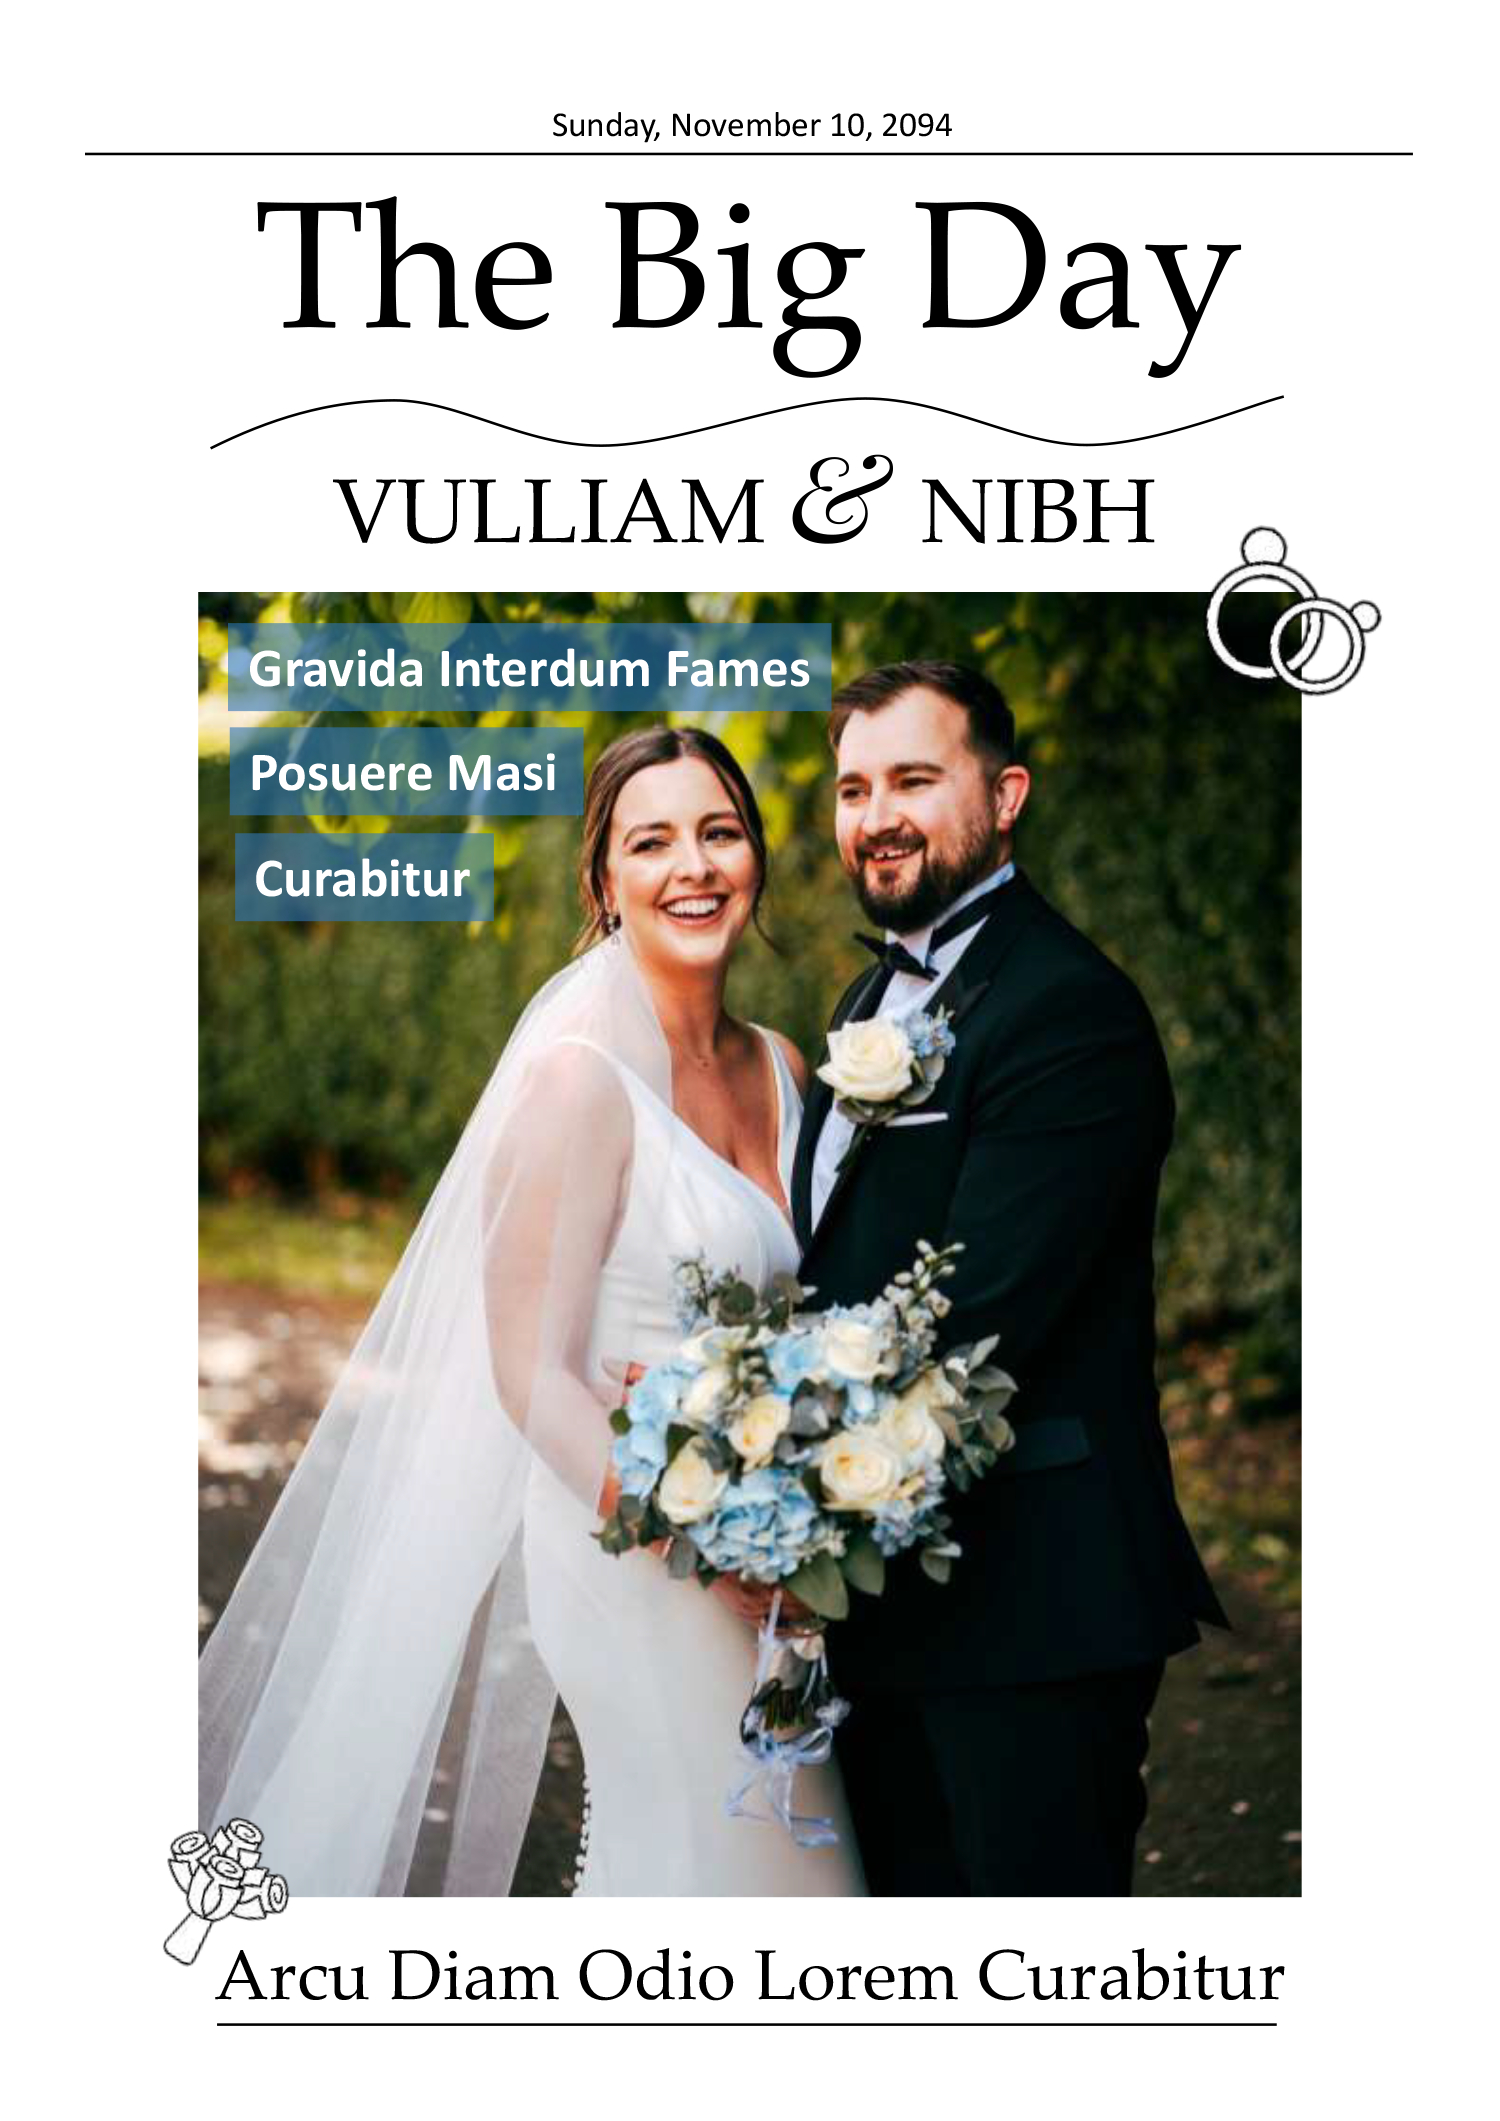 A4 Wedding Newspaper Template - Front Page